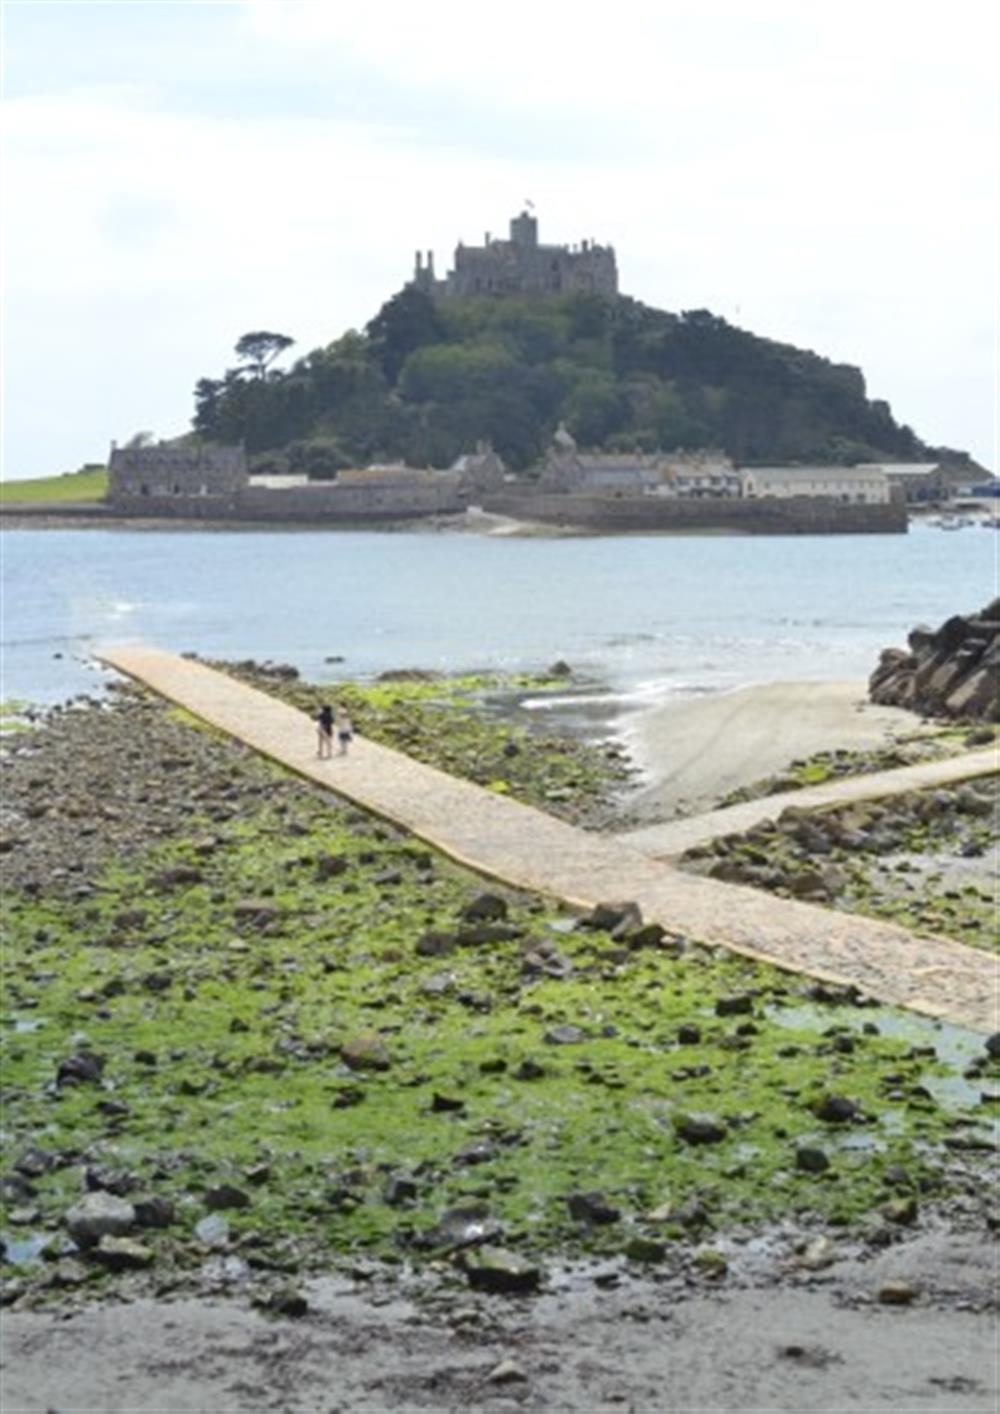 St Michael's Mount is 45 minutes away. Walk across the causeway or catch the water-taxi across to the island.